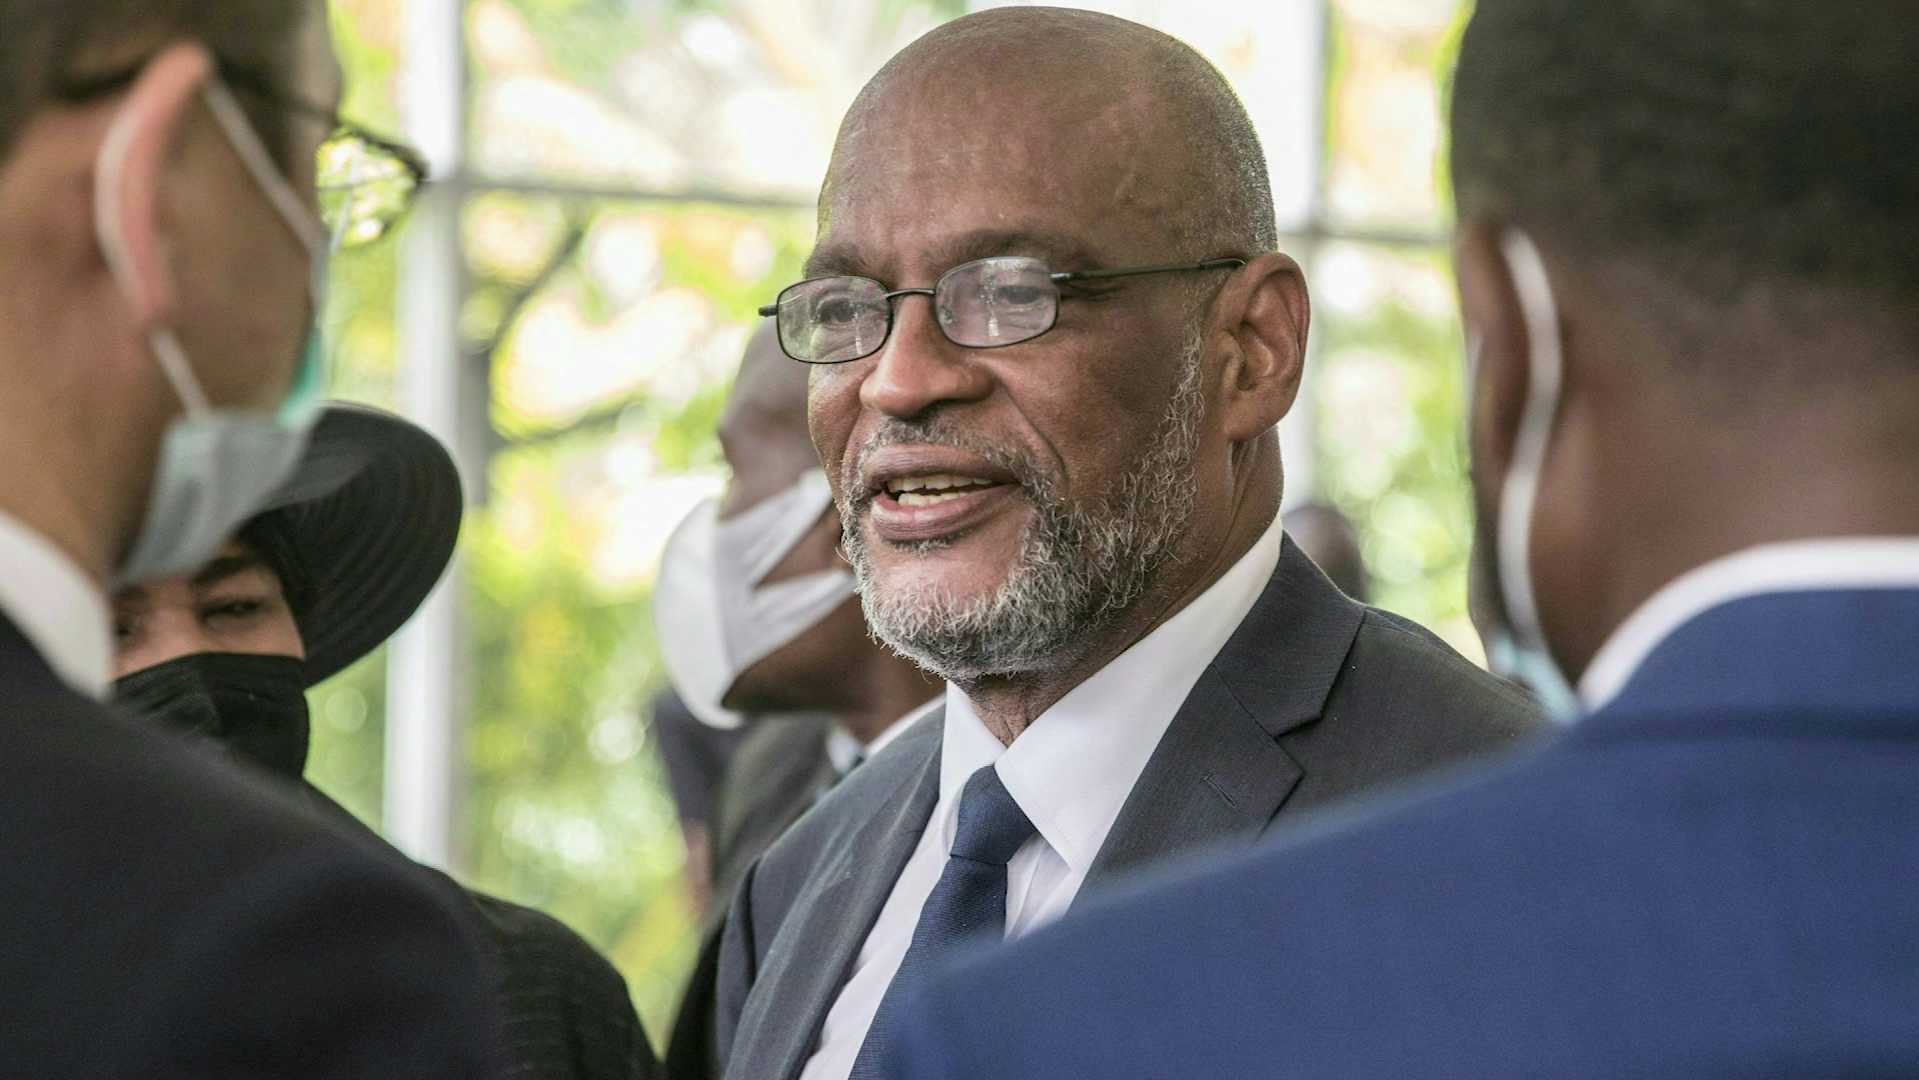 Ariel Henry, a neurologist by training, was named prime minister on July 5 by late President Jovenel Moise but was never officially sworn in.